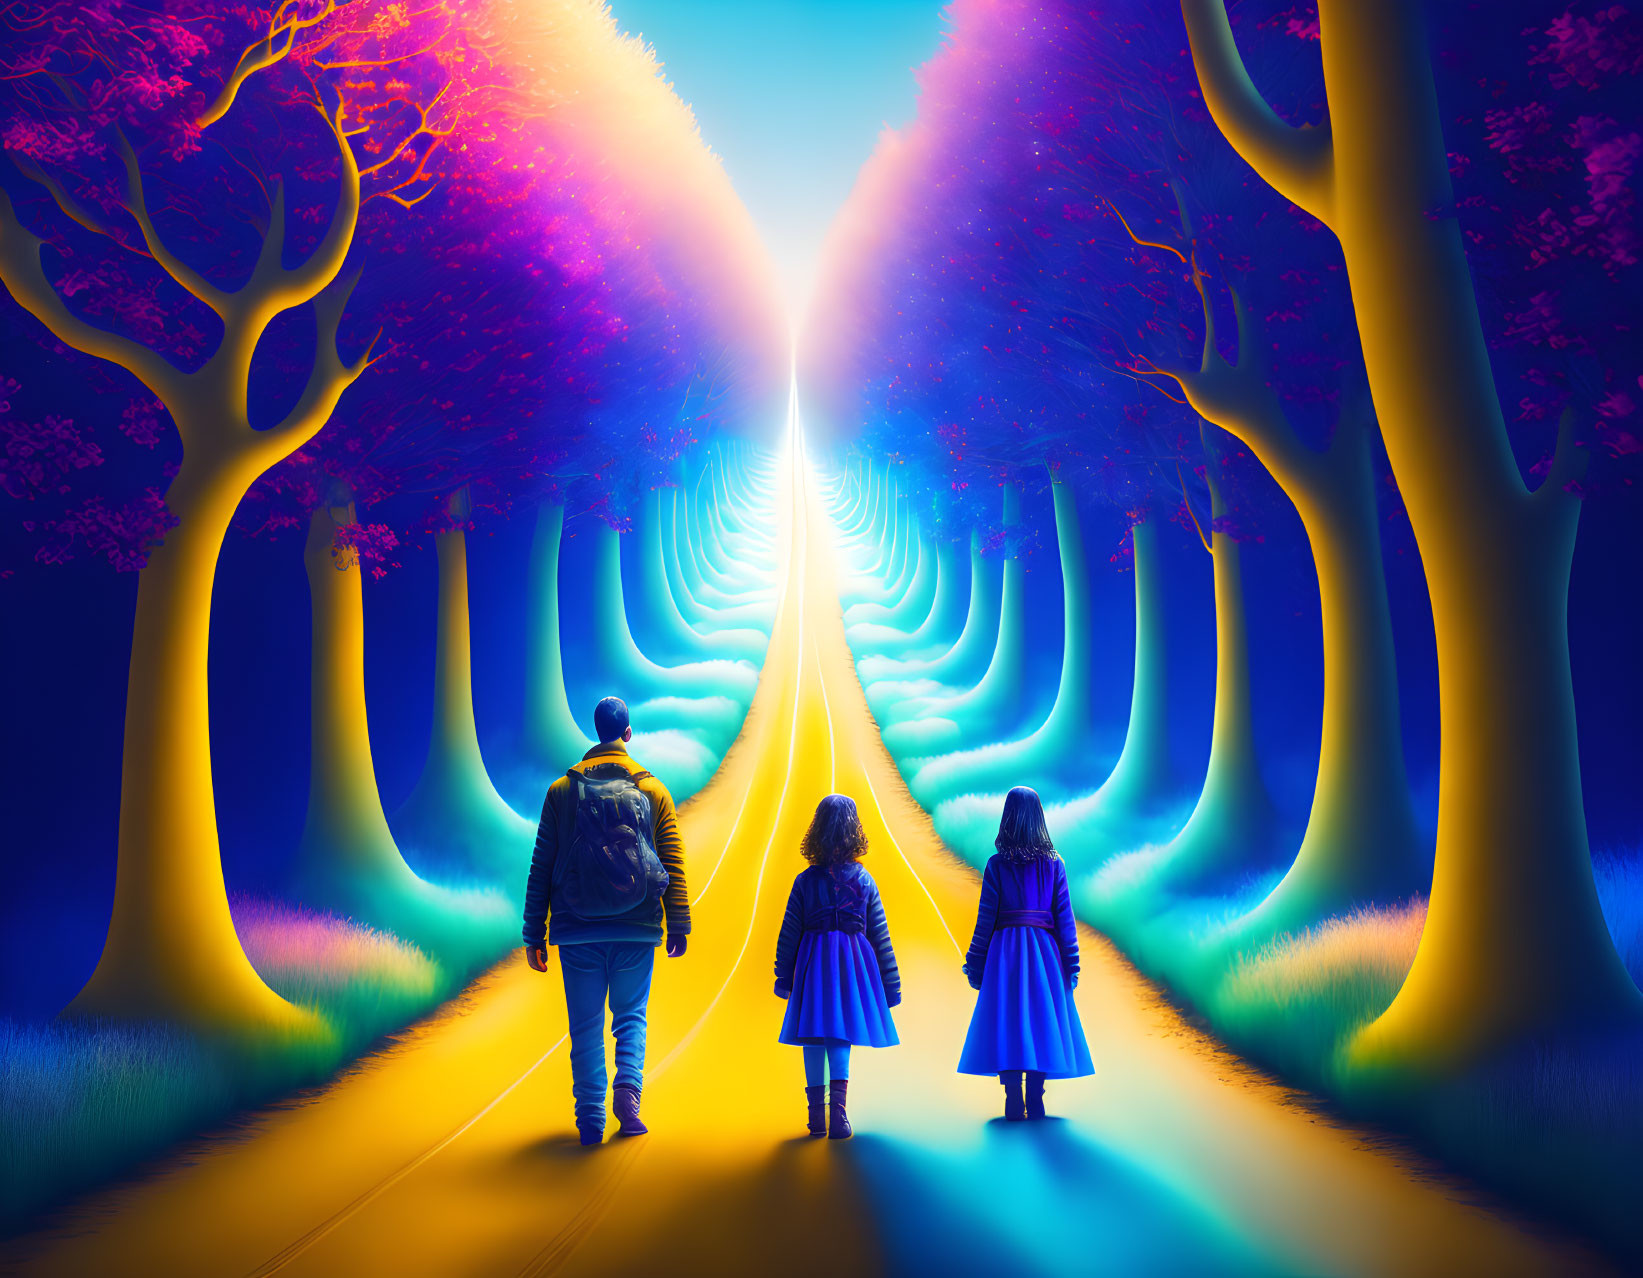 Vibrant mystical forest with glowing tree outlines and luminous pathway